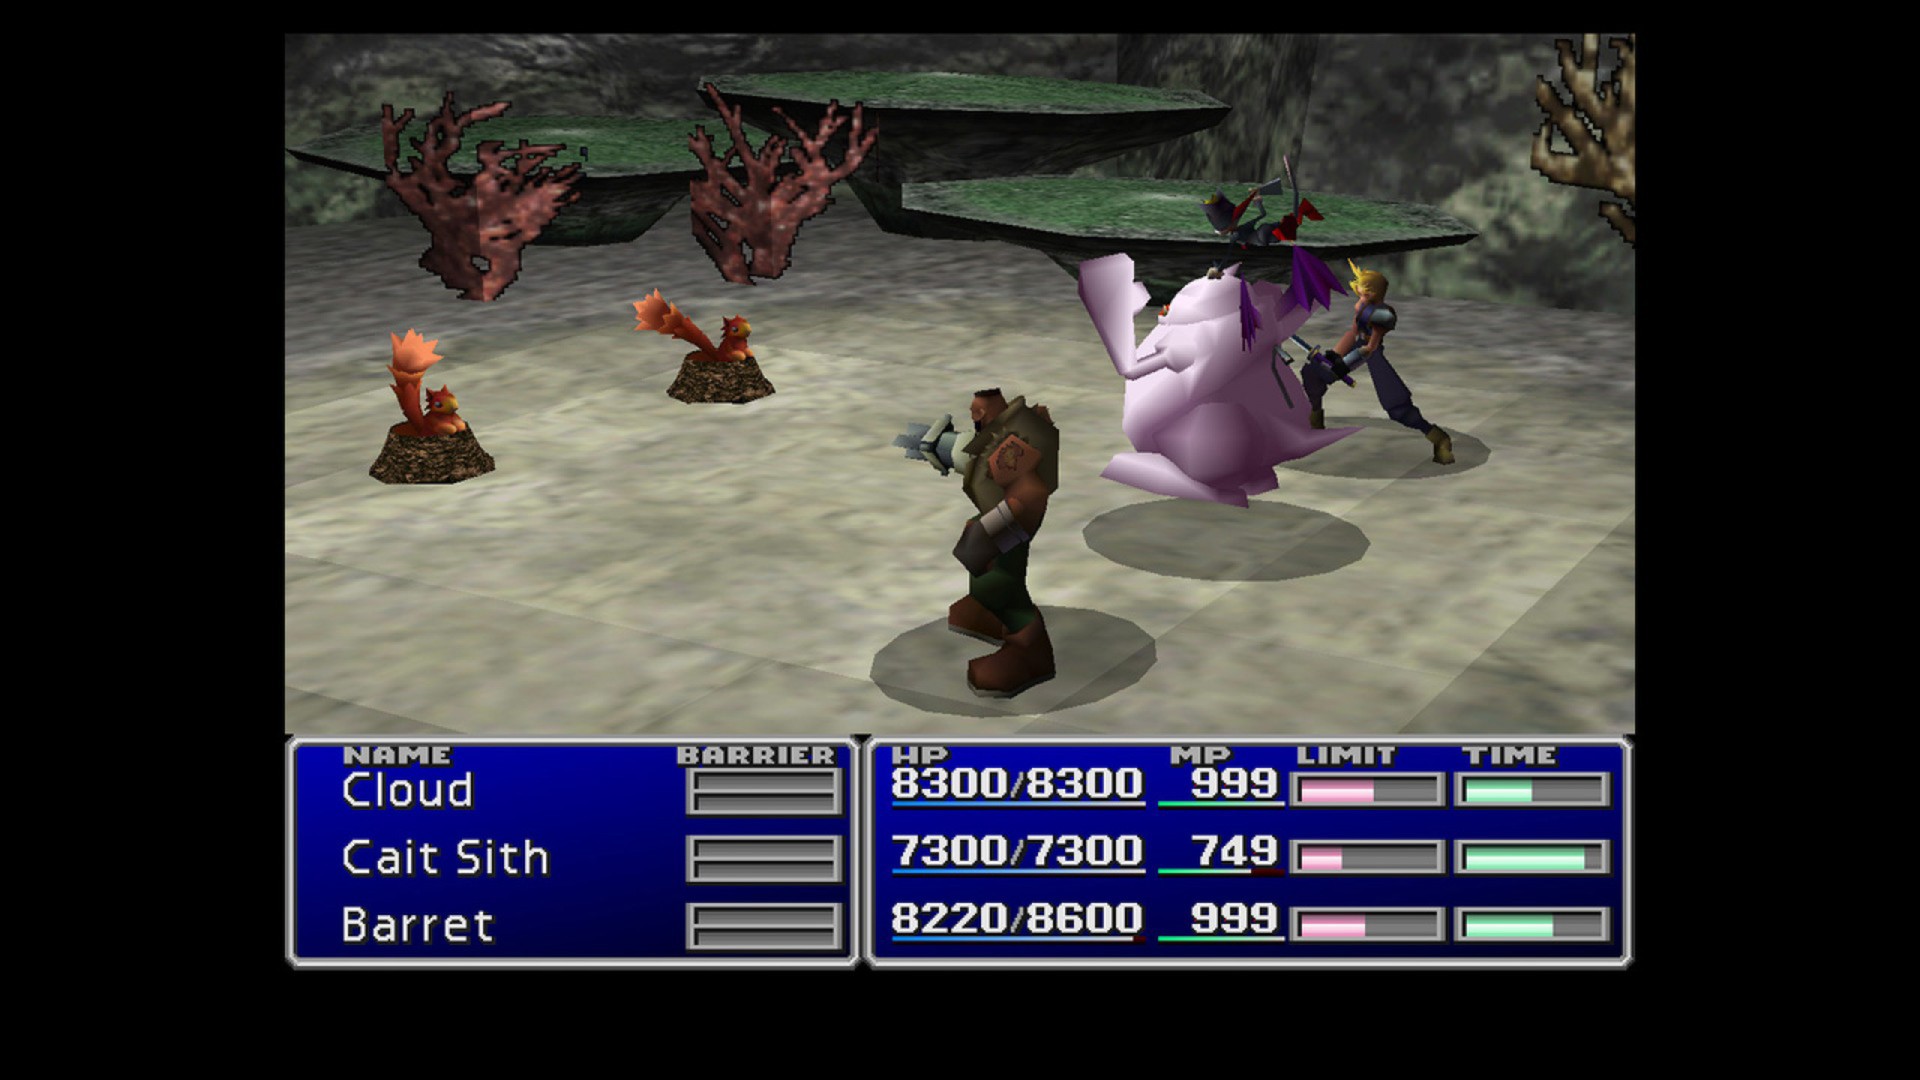 PS1 emulation is coming to the App Store soon.